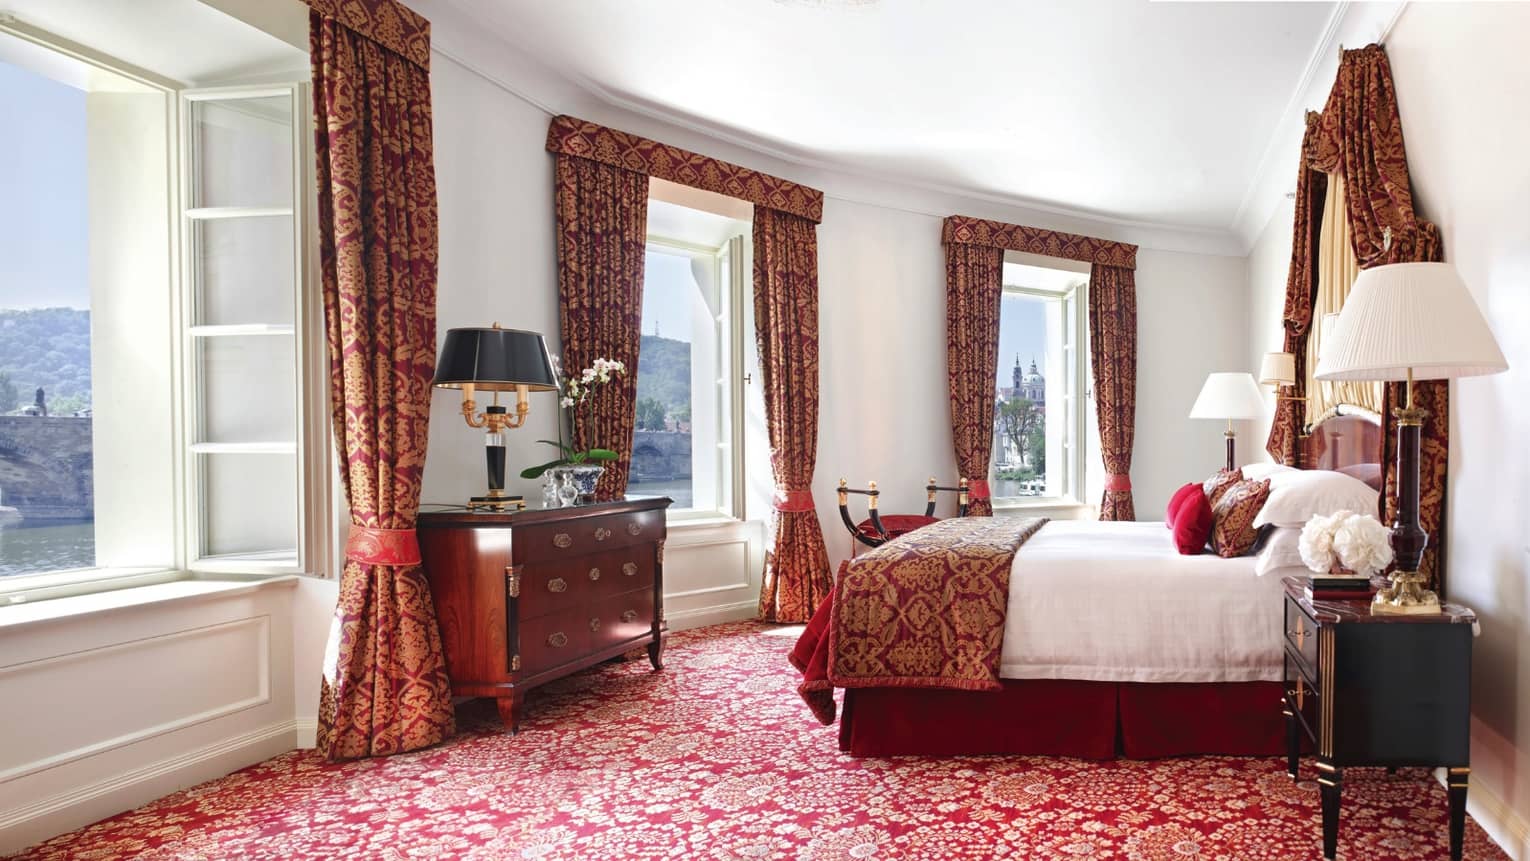 Presidential Suite with bright windows along curved wall, Baroque-inspired red-and-gold carpet, curtains